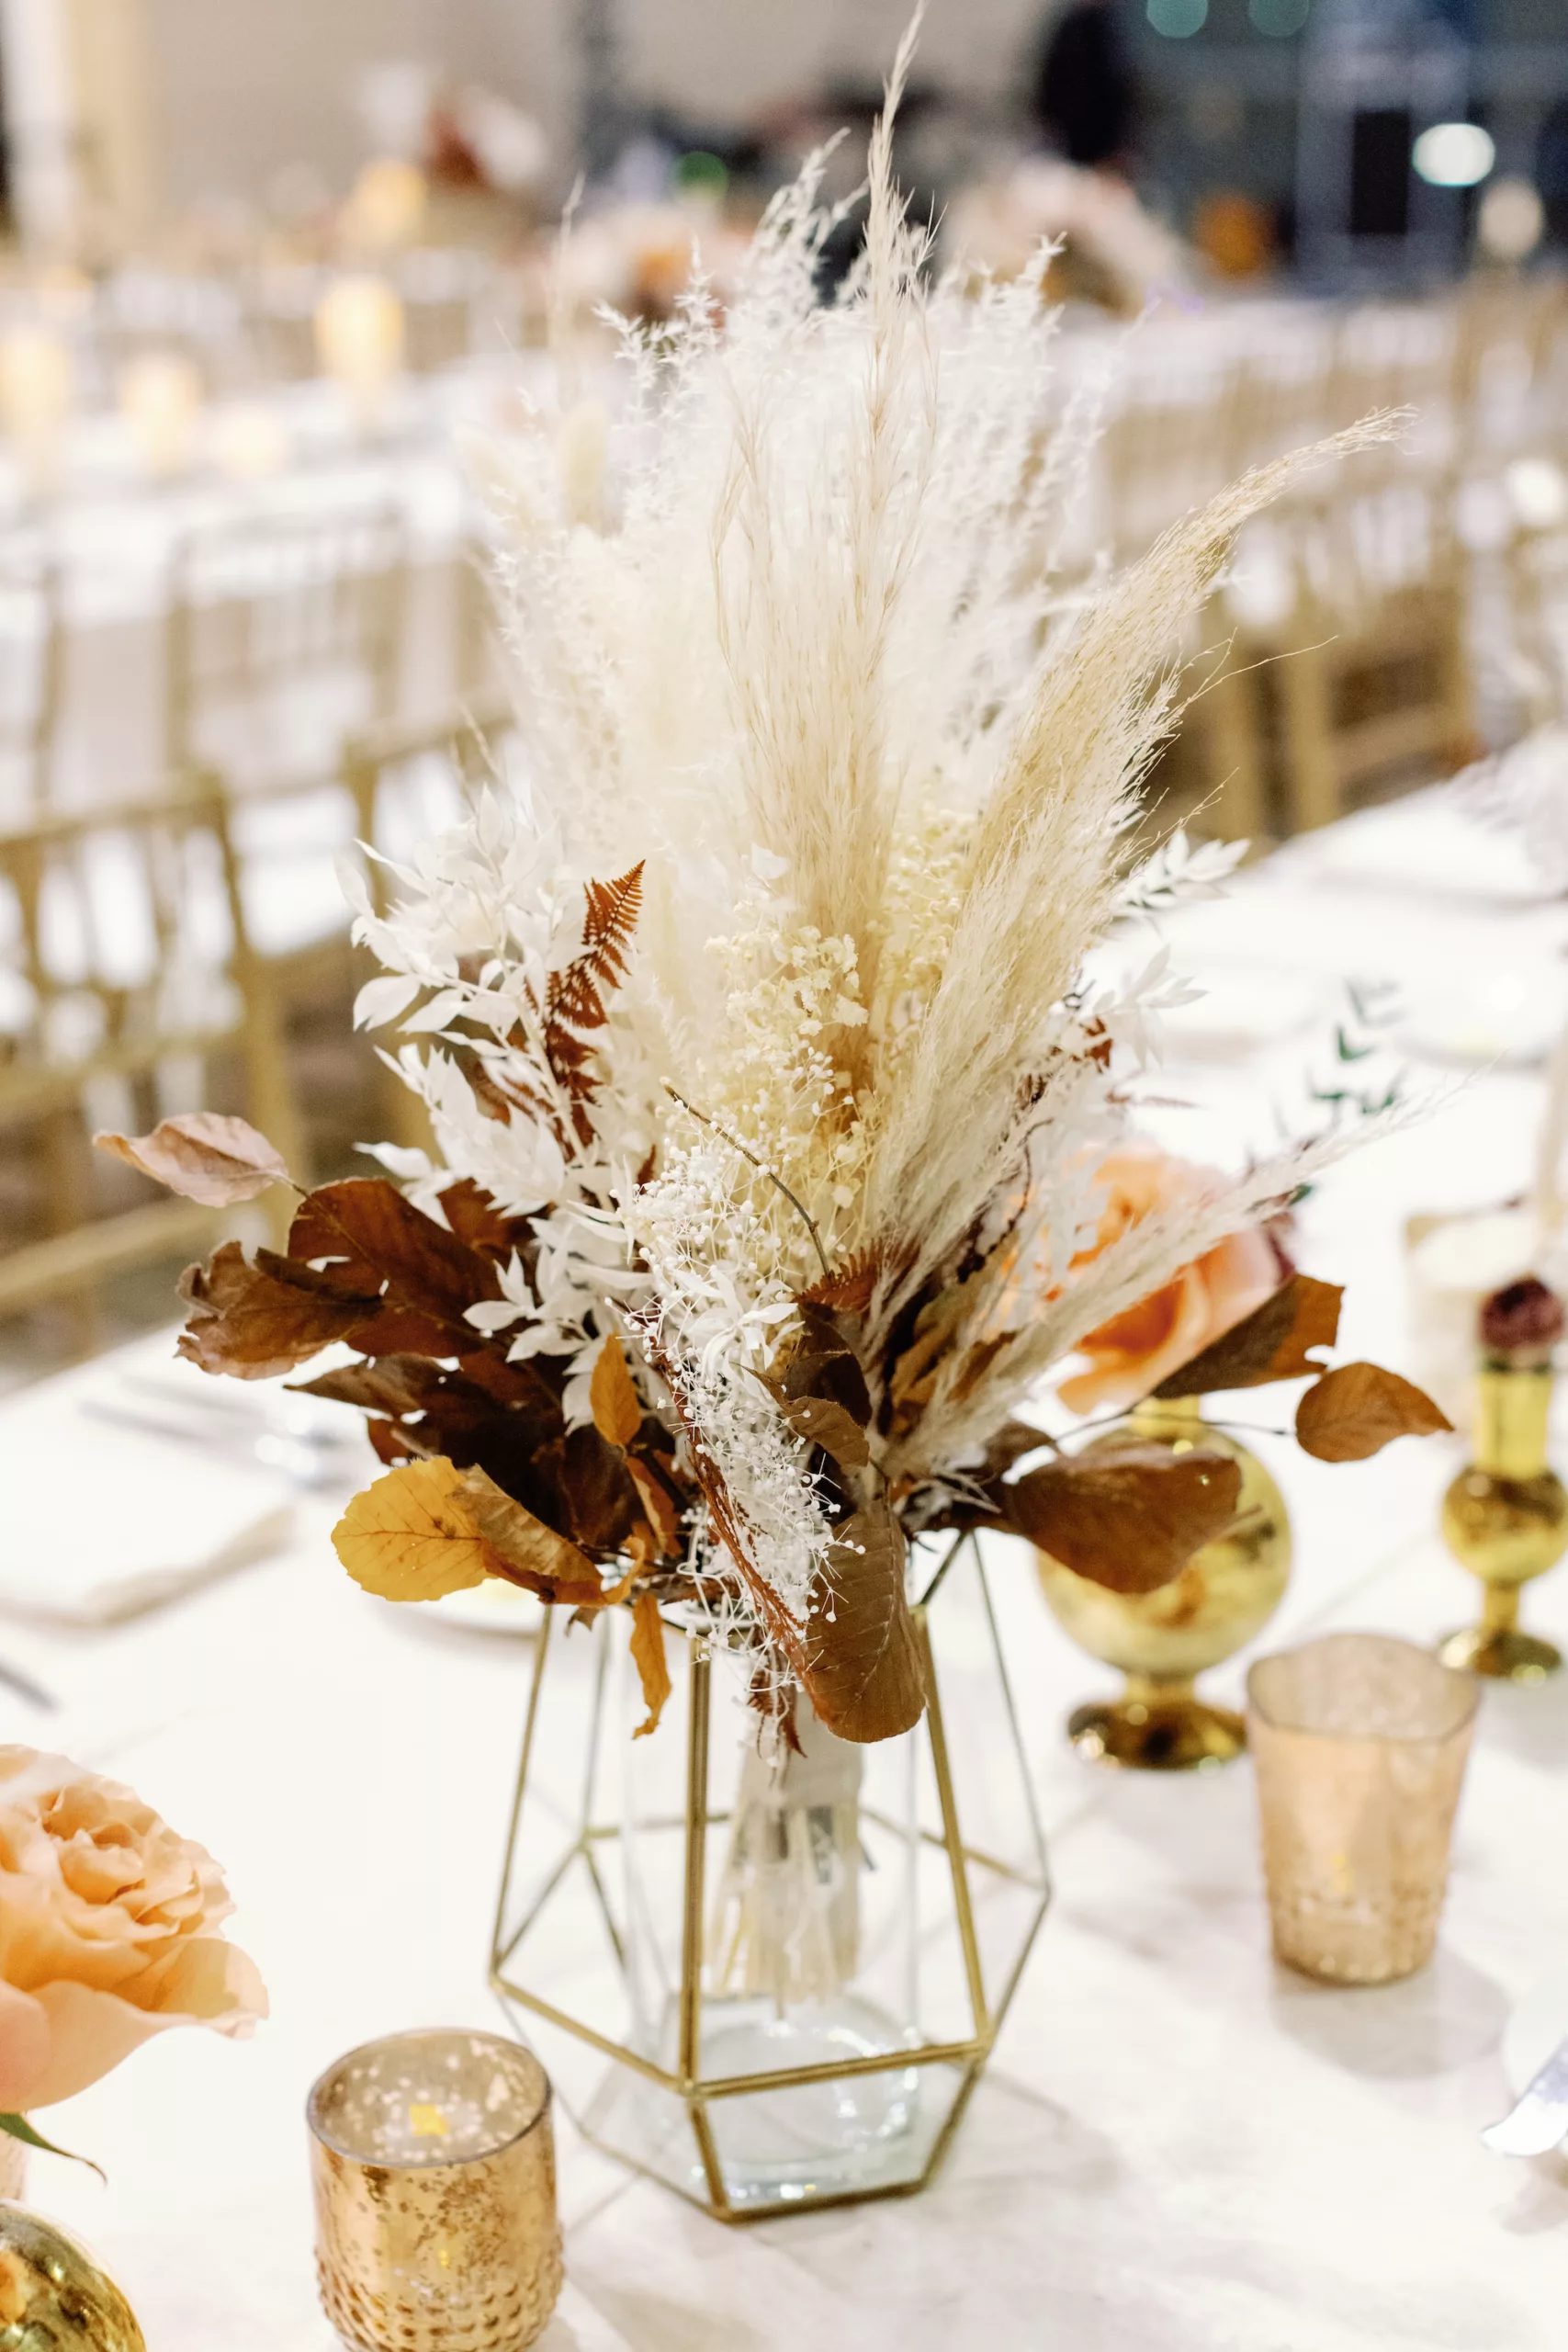 White and Burnt Orange Boho Indian Wedding Reception Centerpiece Decor Ideas | Dried Pampas Grass, Ferns, Brown Leaves and Gold Geometric Vase